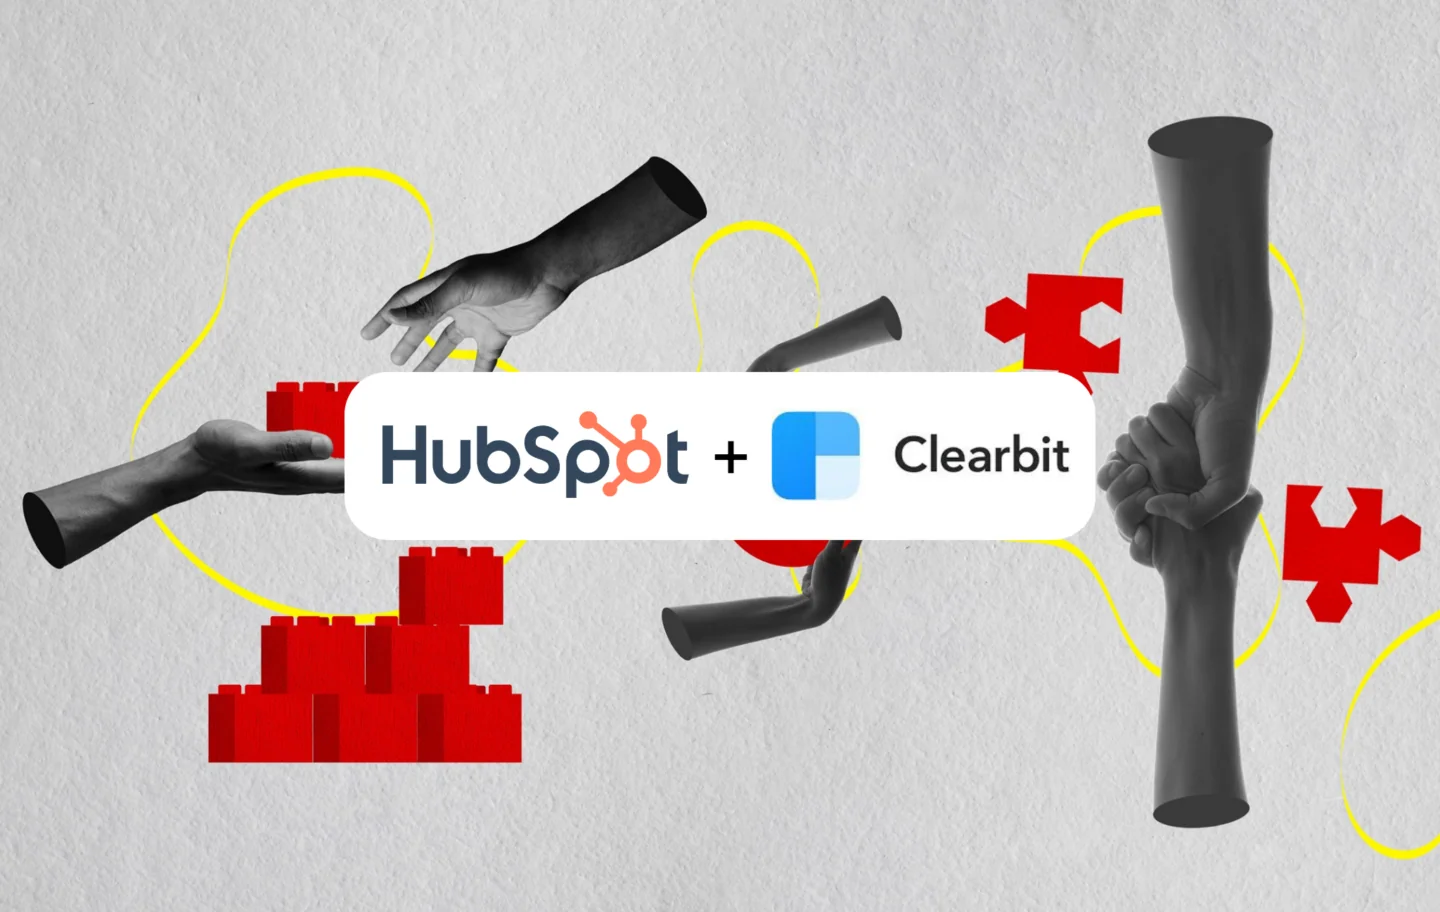 Observers-HubSpot's-Clearbit-Acquisition-Price